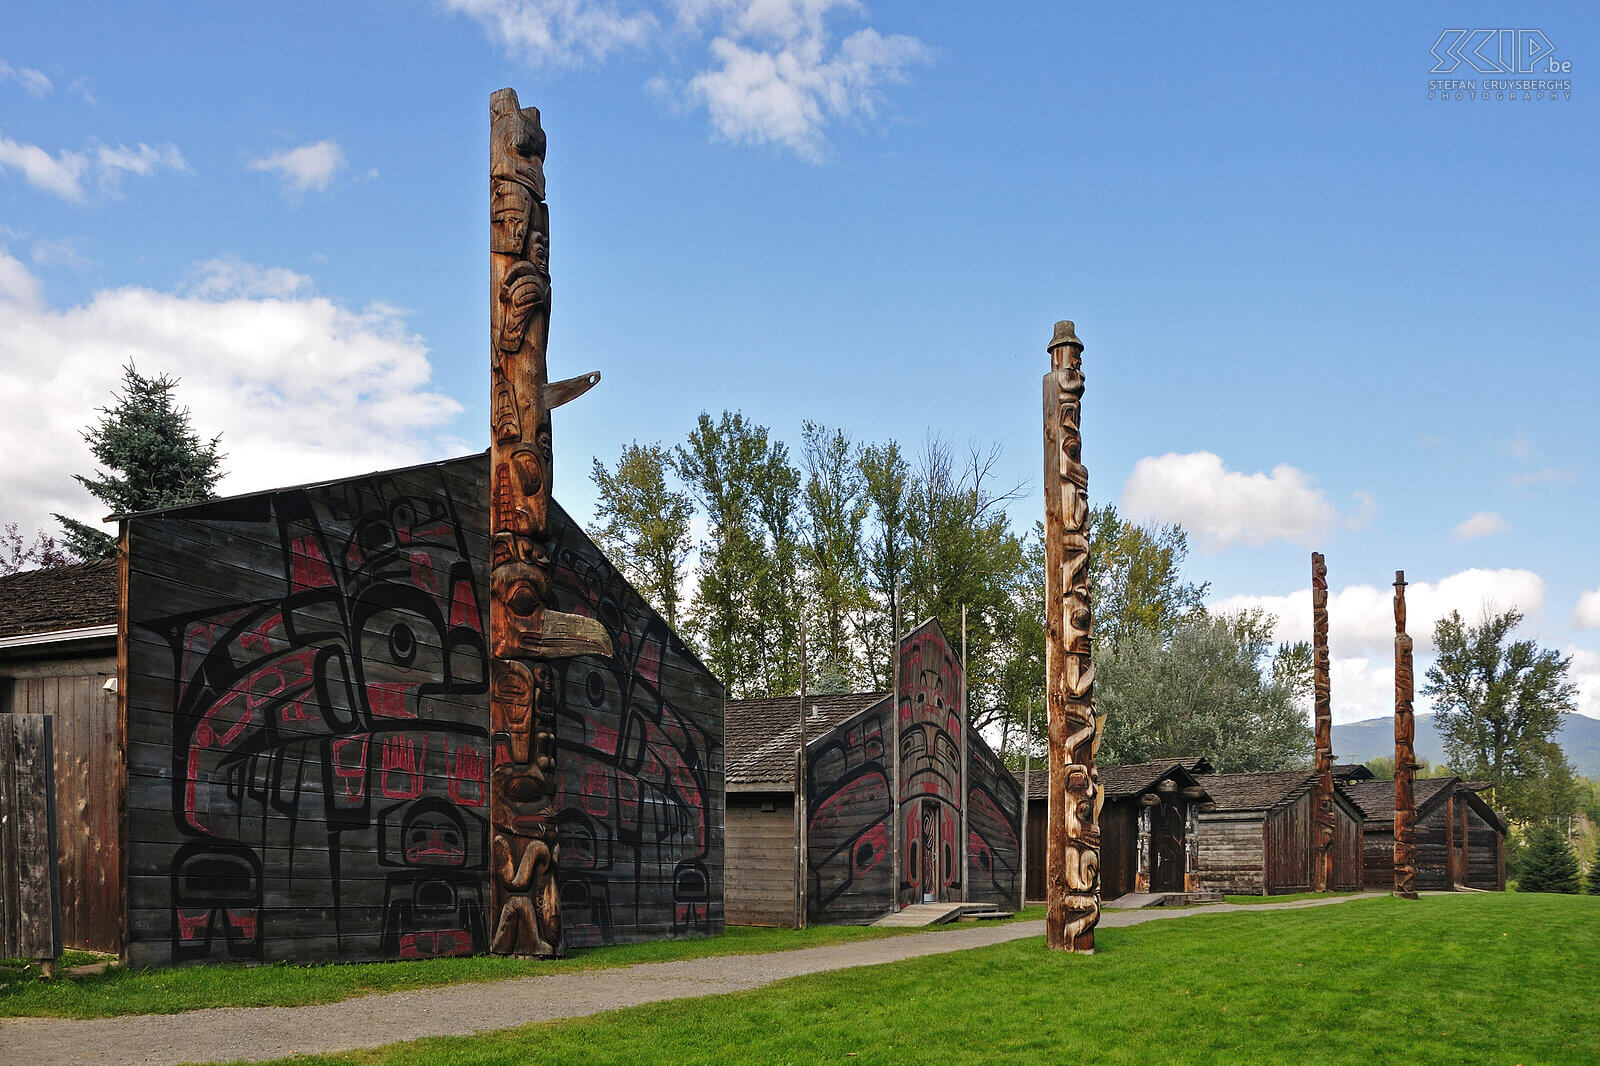 Hazelton - Ksan After 2 days of driving to the west coast we visited the interesting Ksan Historical Village with longhouses and totempoles of the Ksan native people. Stefan Cruysberghs